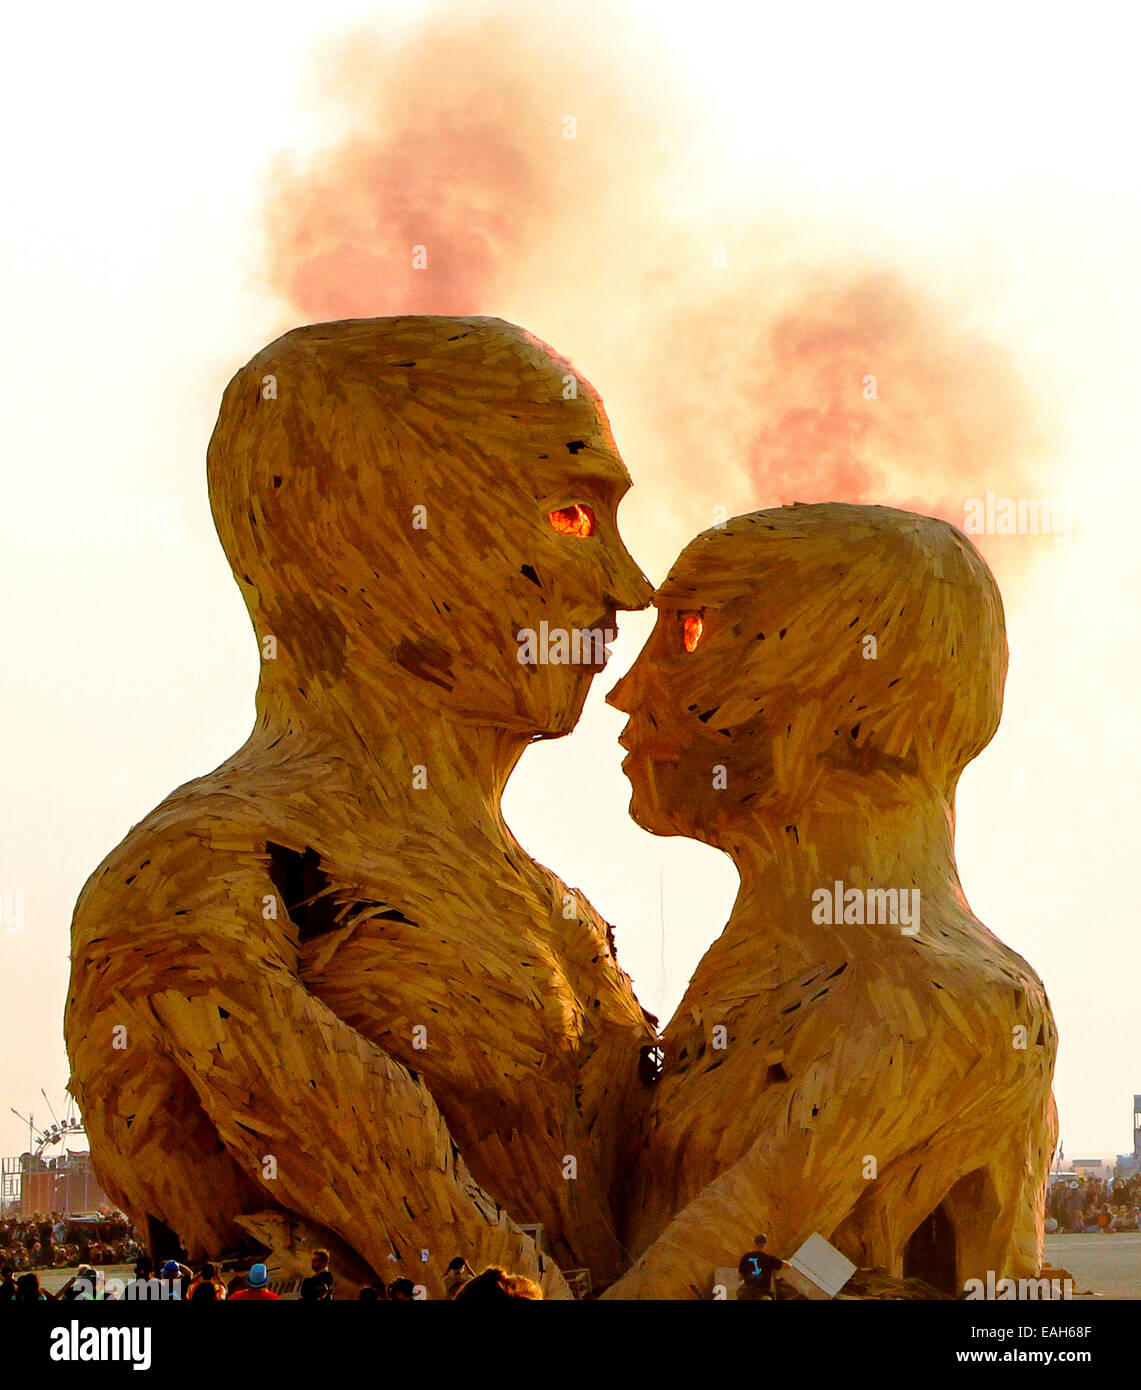 The art installation Embrace is set on fire on the playa at the annual Burning Man festival in the desert August 29, 2014 in Black Rock City, Nevada. Stock Photo